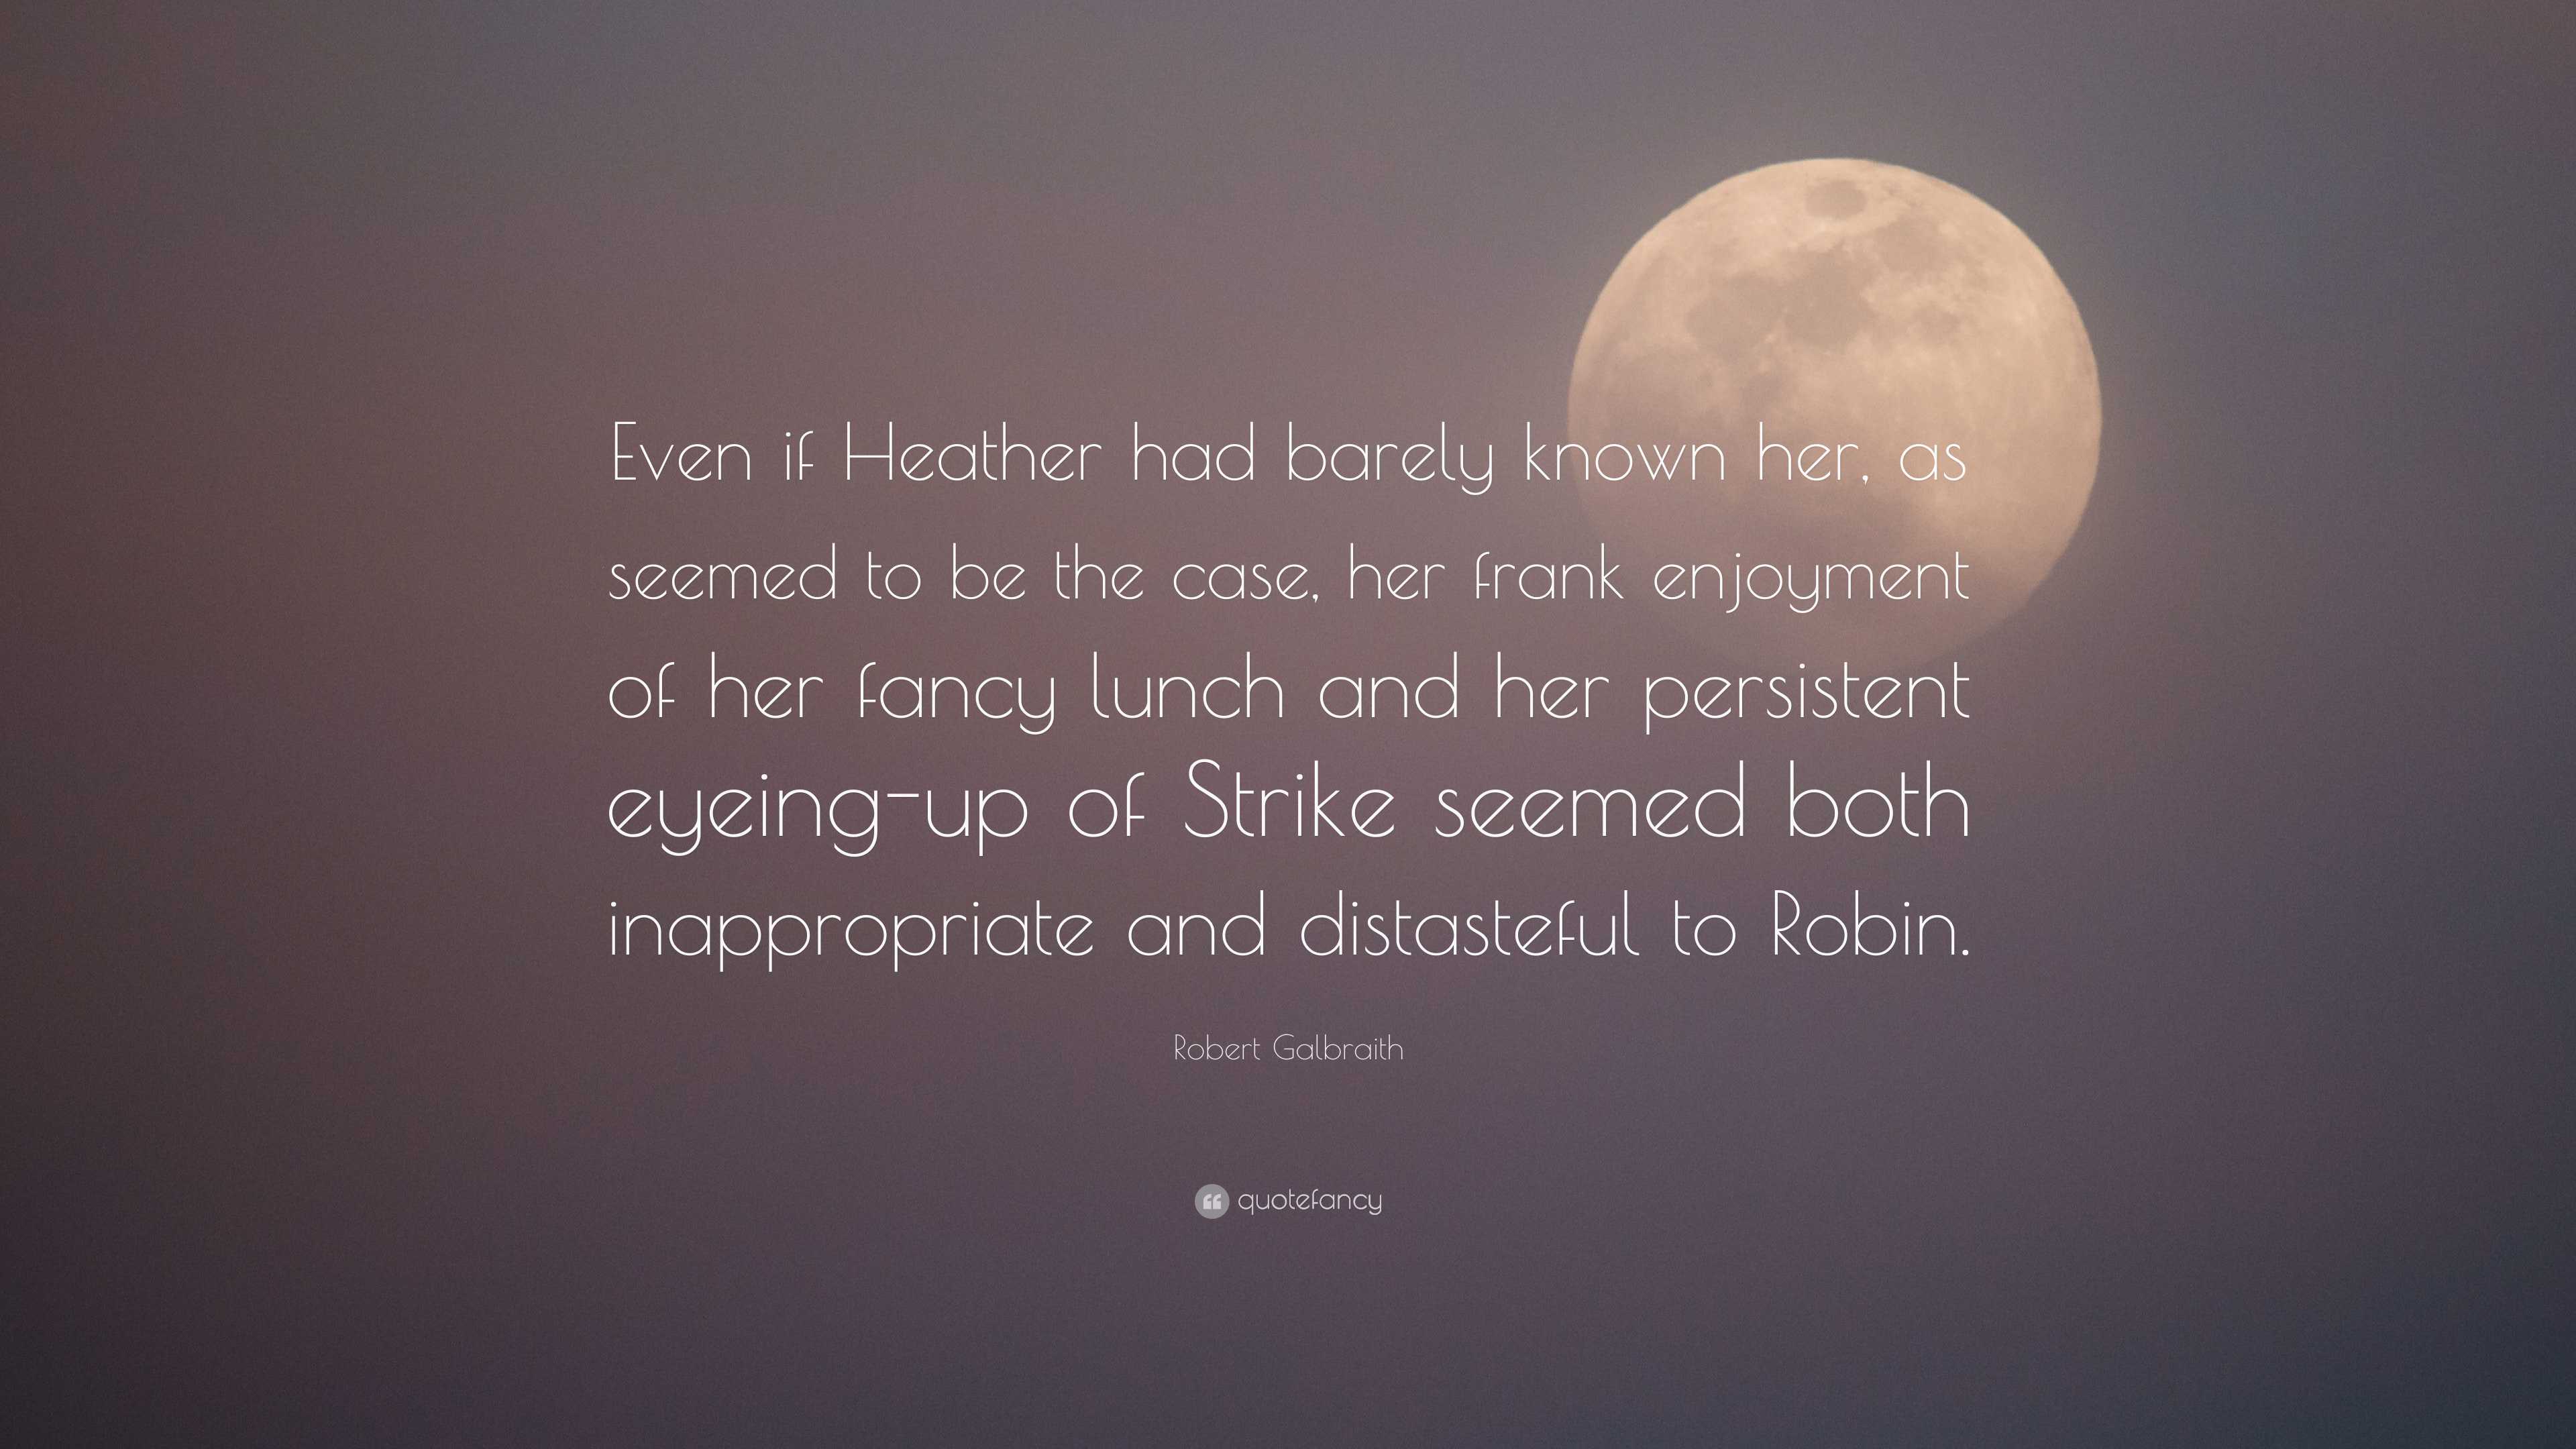 Robert Galbraith Quote: “Even if Heather had barely known her, as